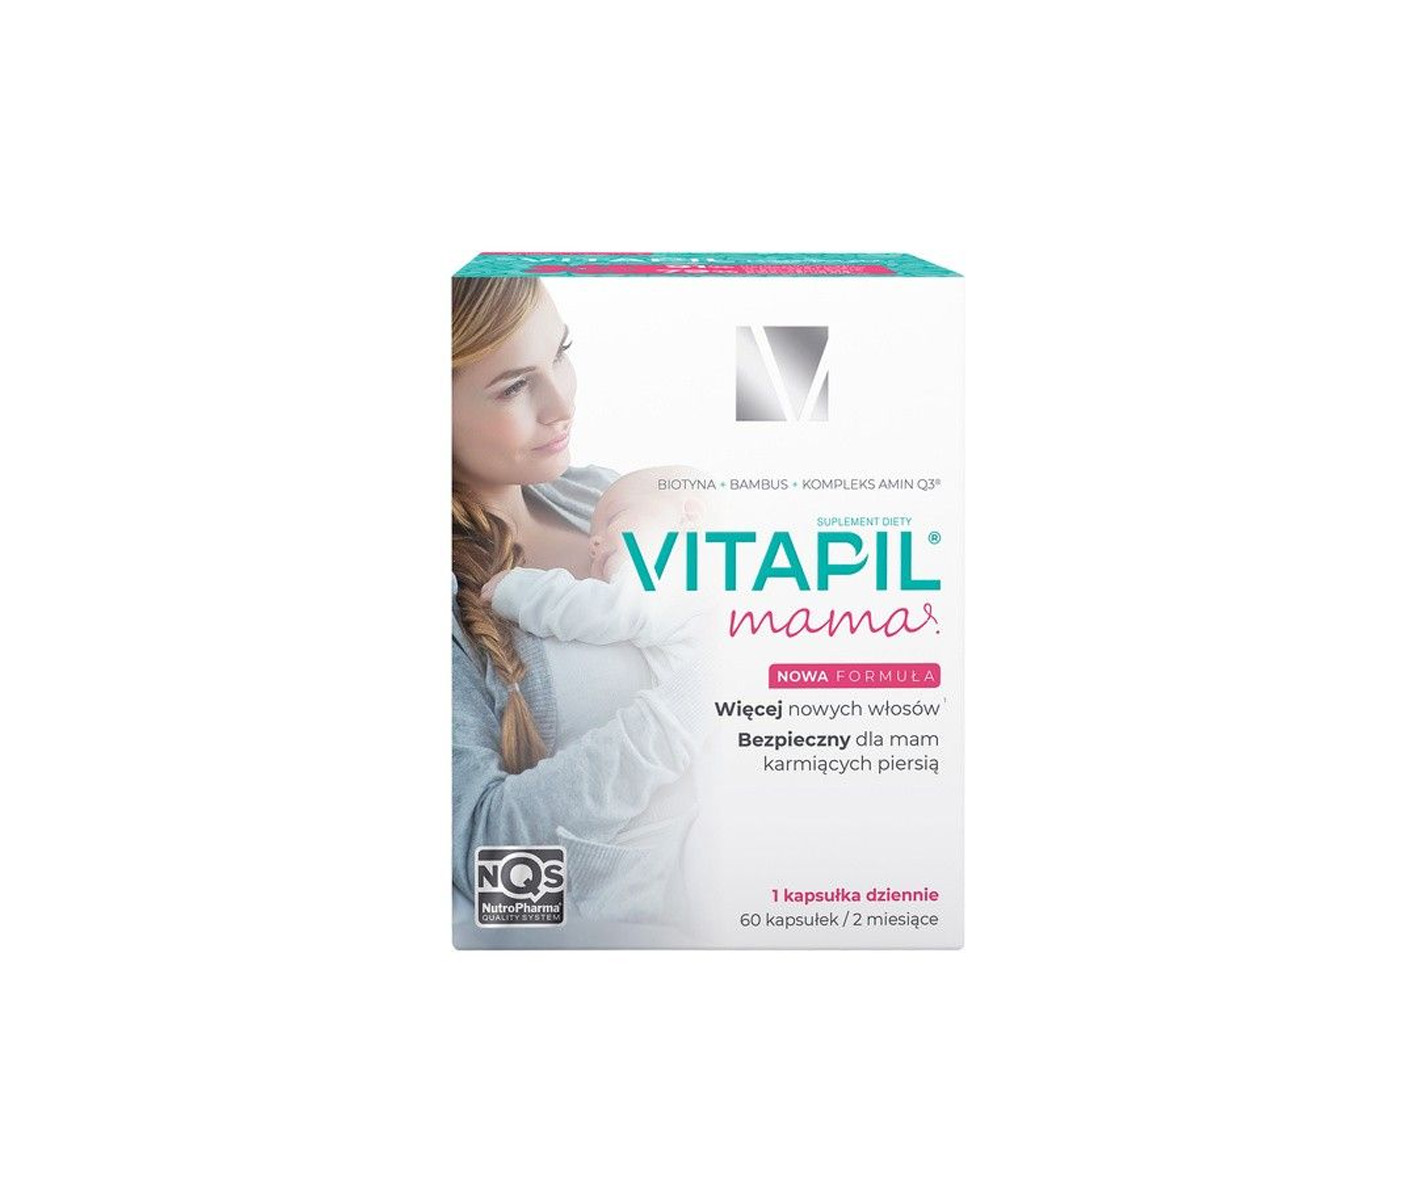 Vitapil Mama, a dietary supplement for hair loss after pregnancy